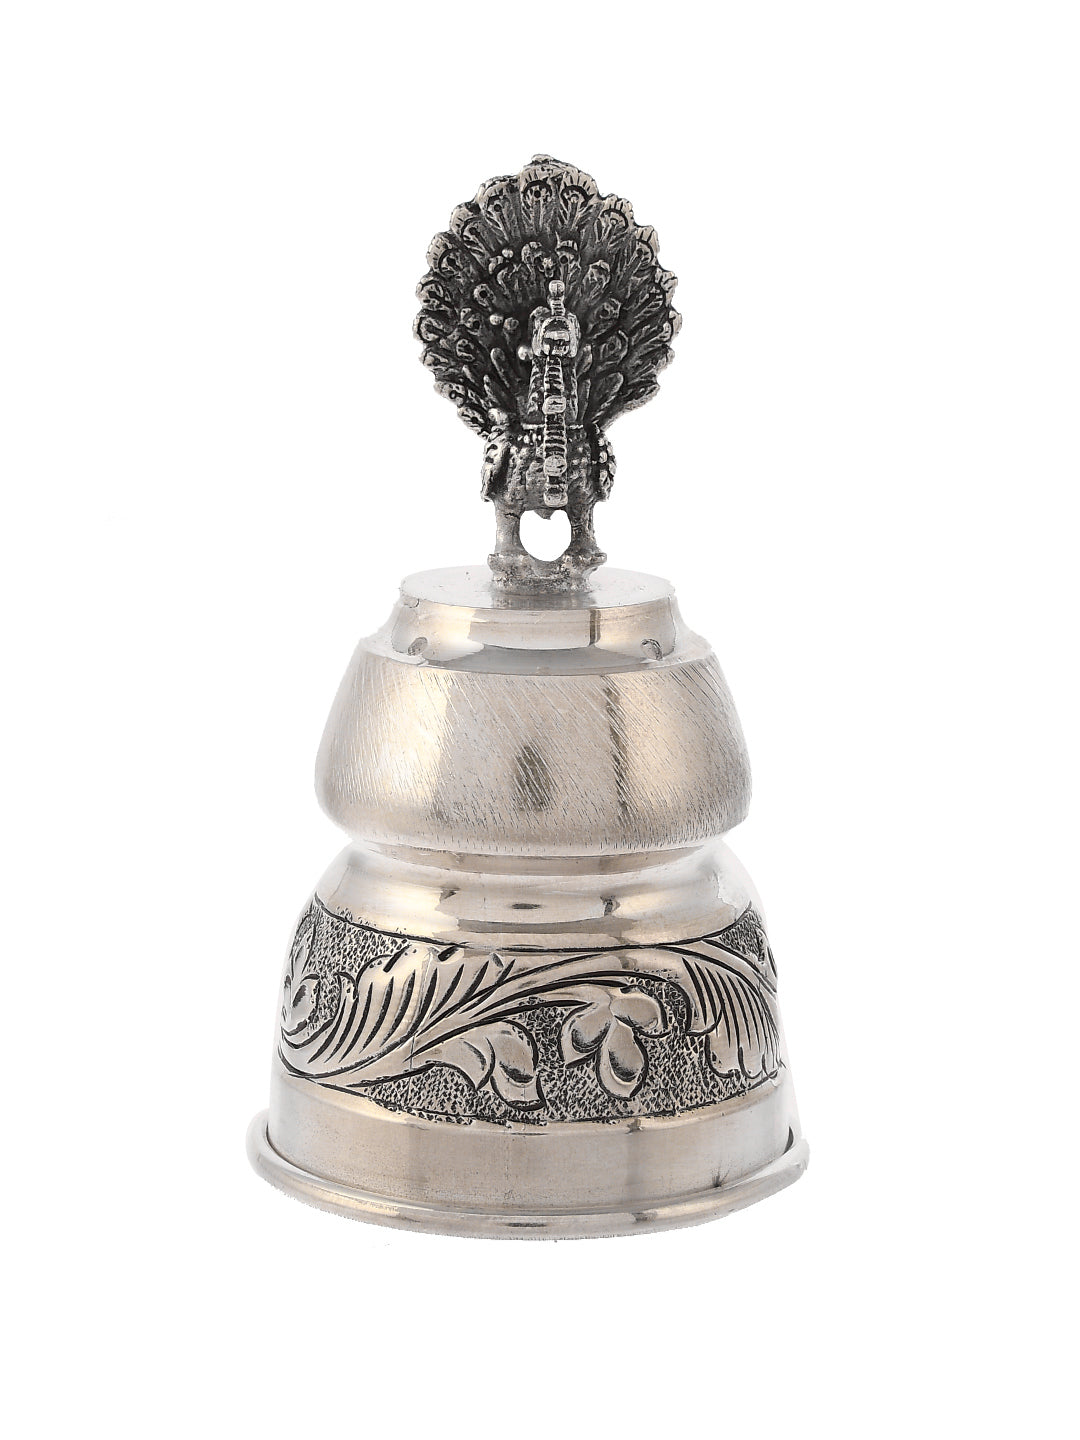 999 Sterling Silver Peacock Agarbatti Stand for Pooja and Mandir